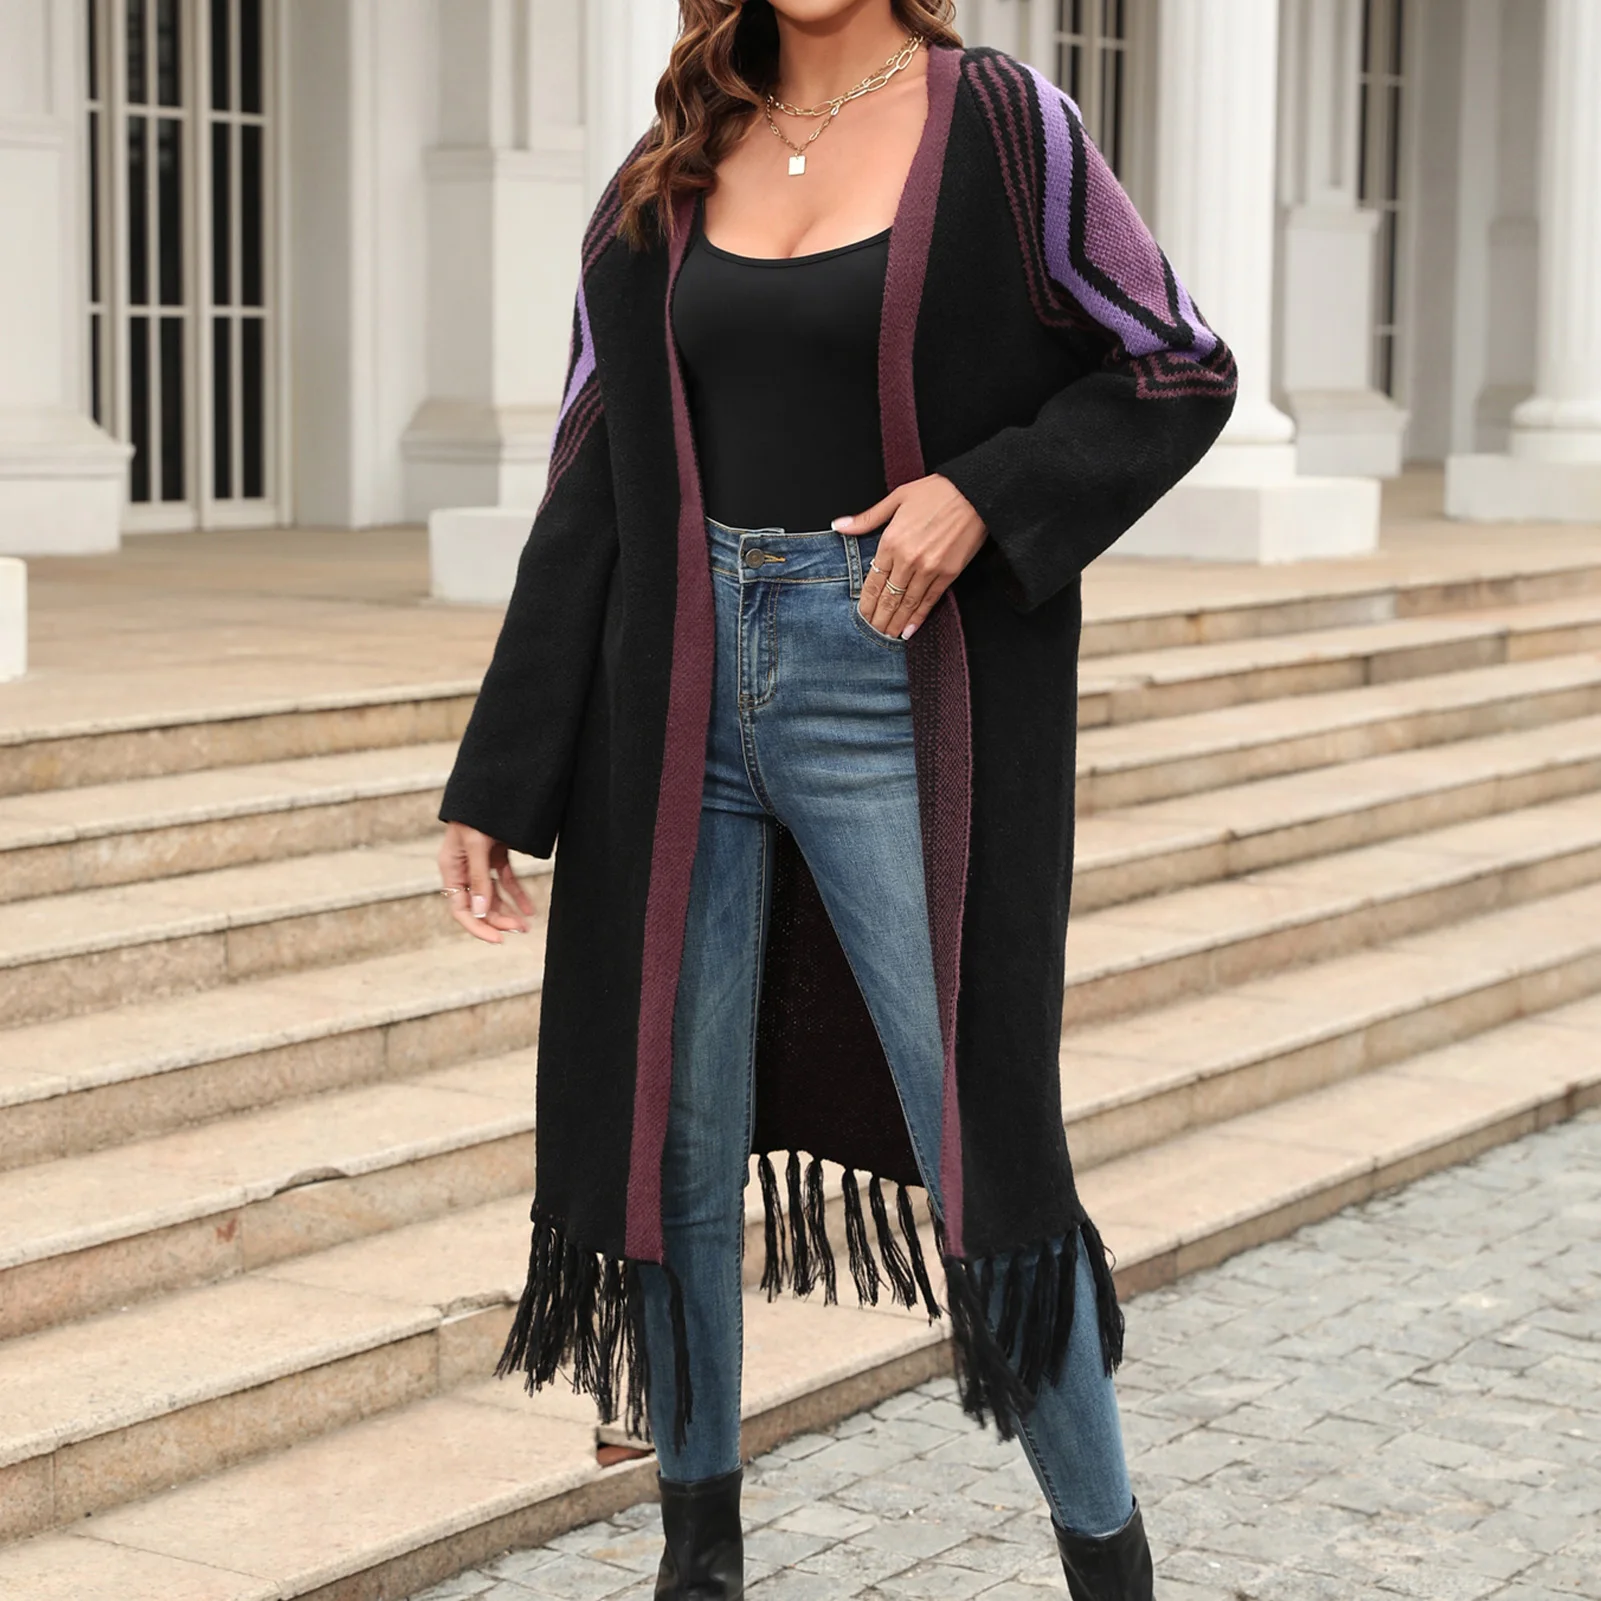 

Elegant Long Outerwear Maxi Y2k Sweater Coat Soft Jacket Cardigans Outwear Coat Comfy Fringe Hem Open Front Sweater Daily Outfit